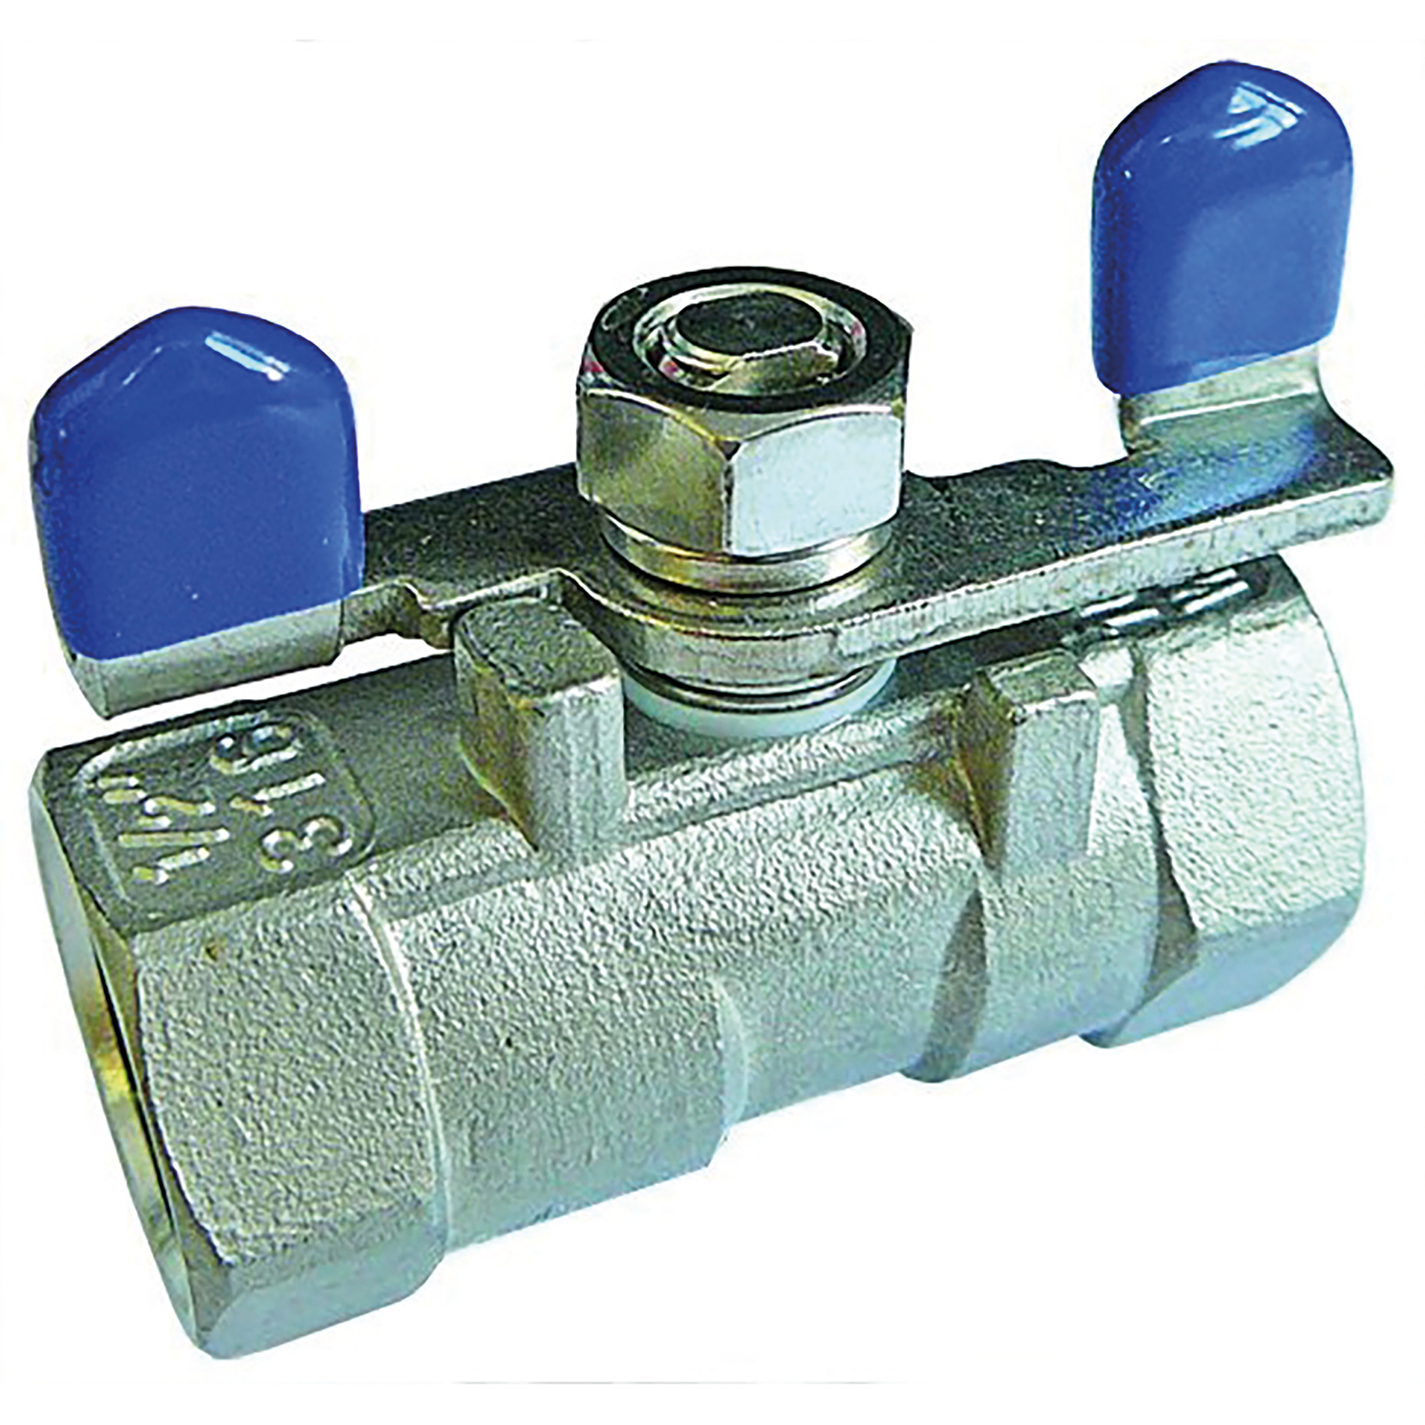 1/4" BSPP Female One Piece Butterfly Ball Valve